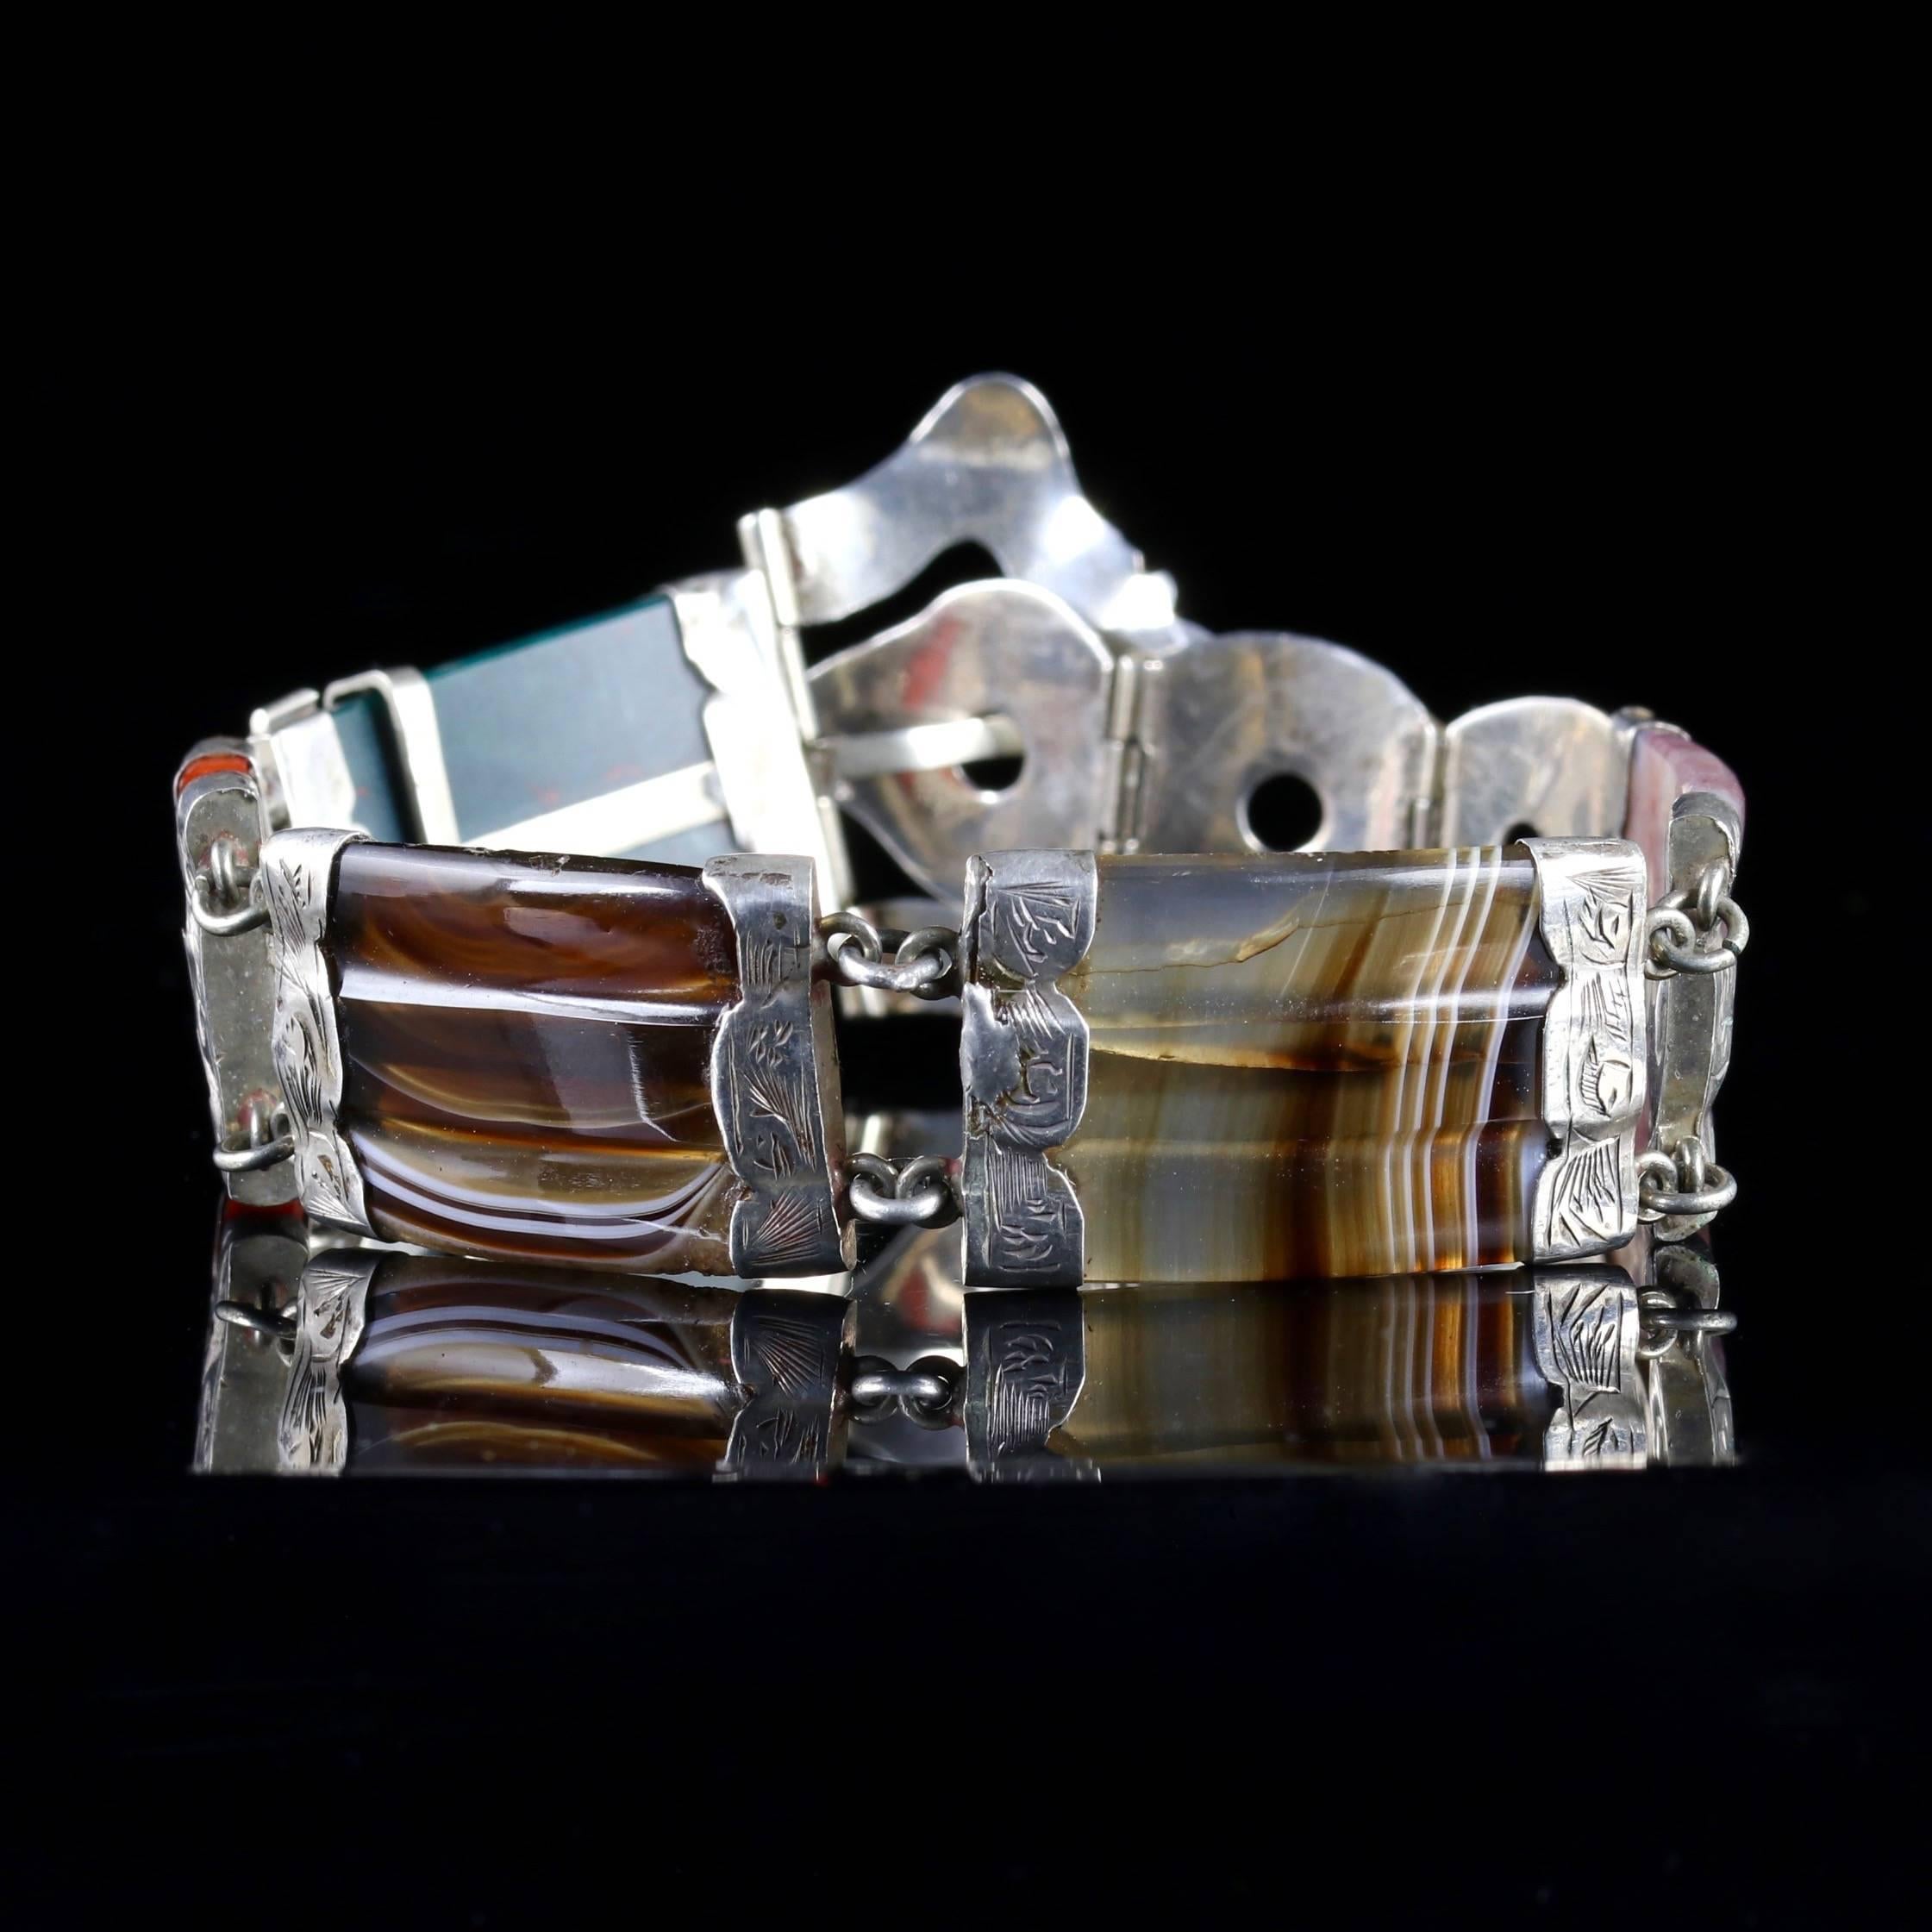 This beautiful Victorian Scottish Silver buckle bracelet is Circa 1860.

The bracelet is fitted with Agate Links, which are set with beautifully engraved floral Silver panels and a fabulous adjustable buckle clasp. 

The Agates show the natural